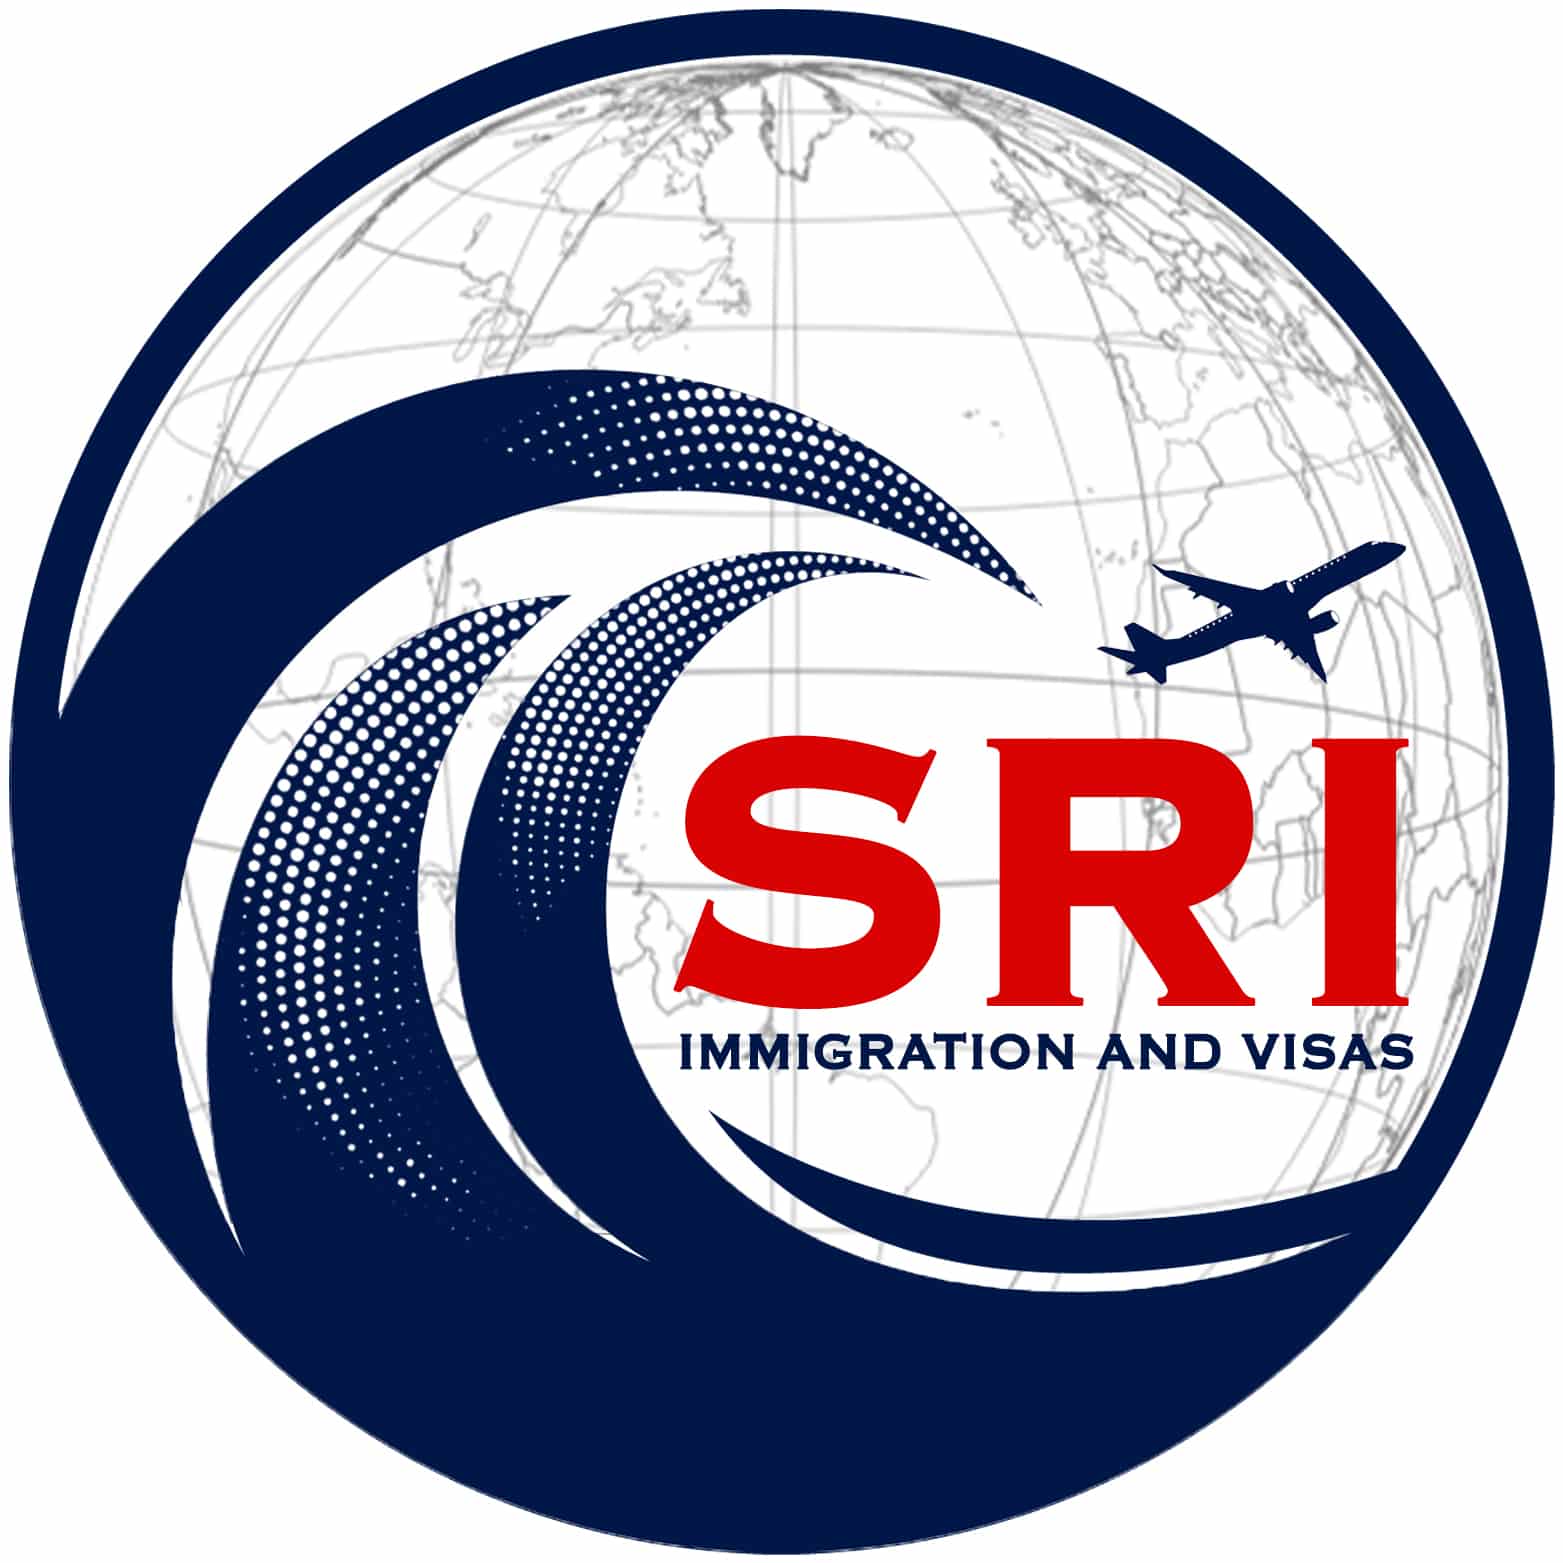 Best Visa and Immigration Consultancy in Gachibowli | Sri Immigration and Visas